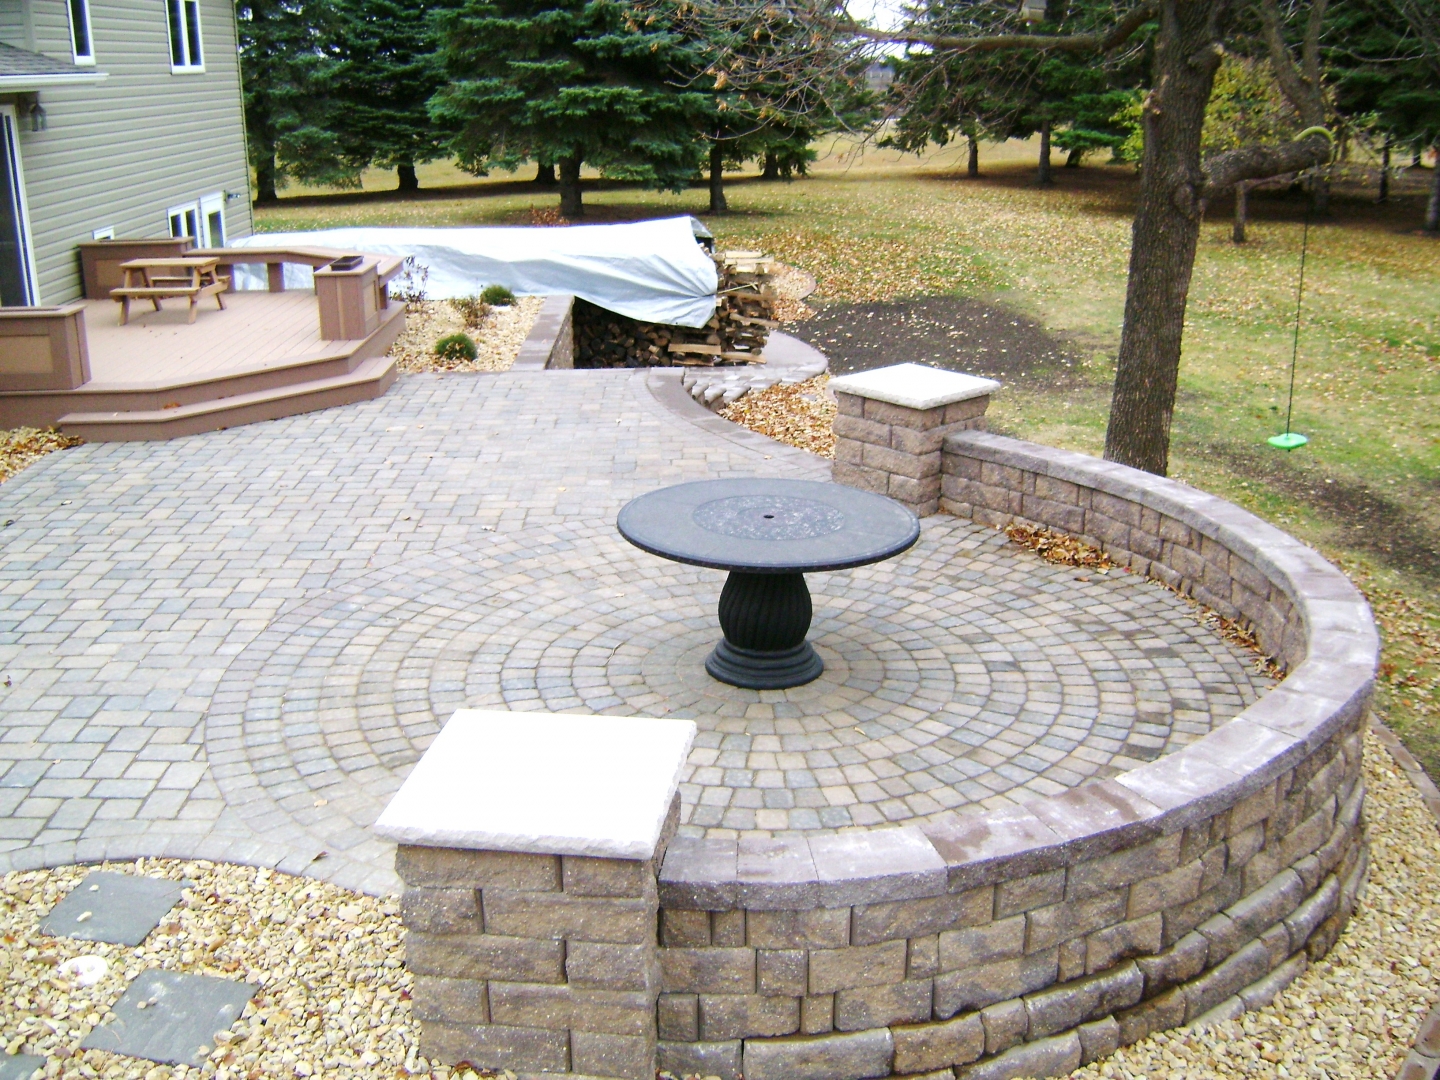 Raised Paver Patio with Retaining Walls, Stairs, Deck, and Seating Wall |  Oasis Landscapes | West Fargo ND